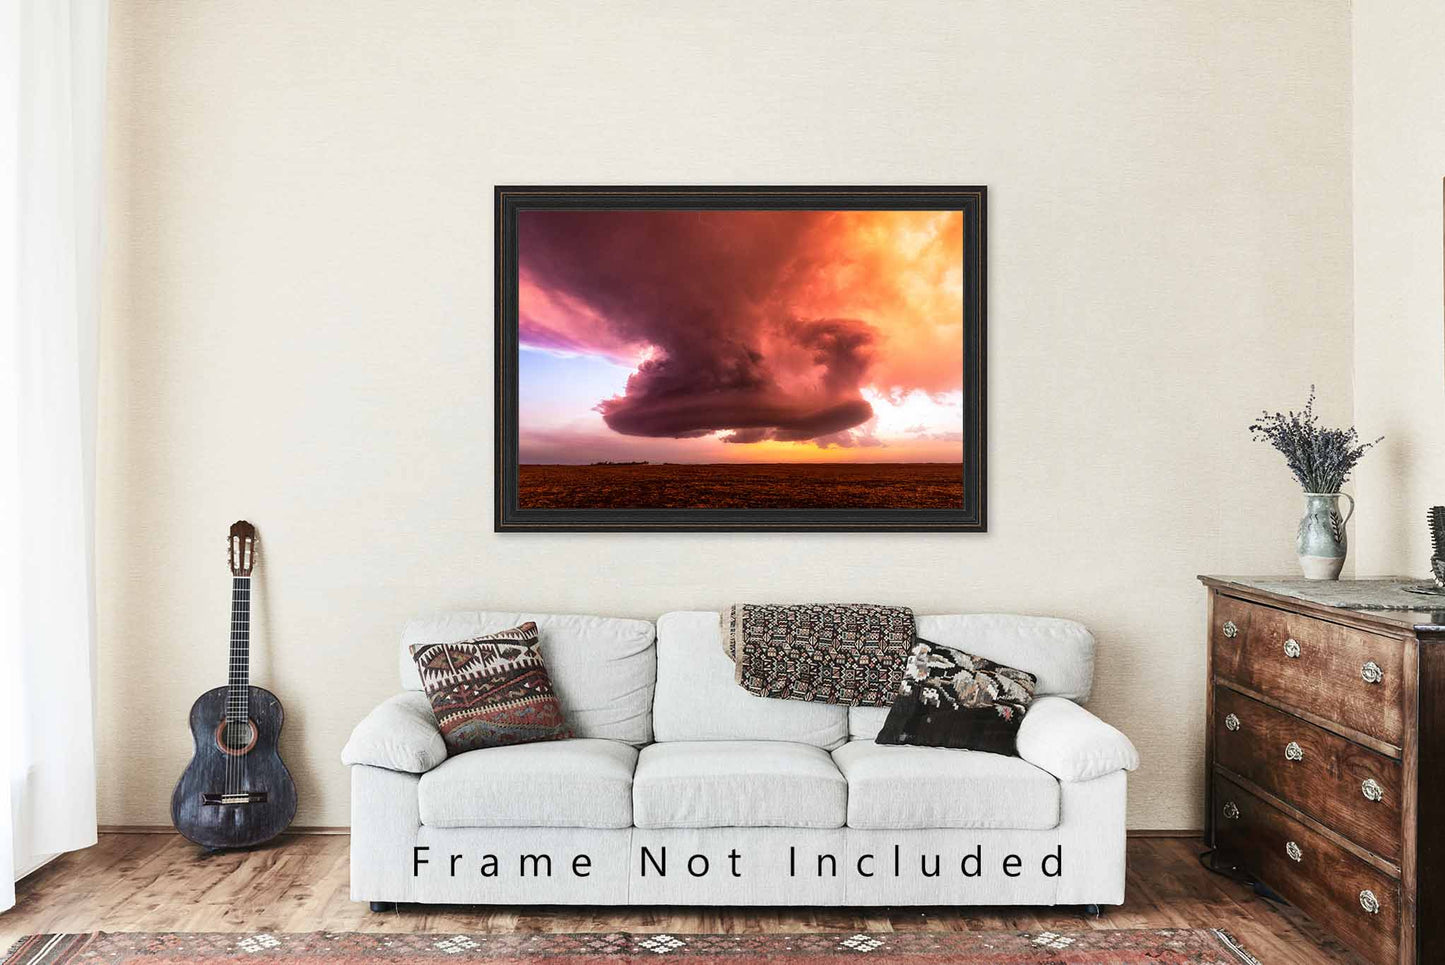 Storm Photography Print (Not Framed) Picture of Supercell Thunderstorm with Red Hue Over Open Field at Sunset on Stormy Spring Evening in Kansas Weather Wall Art Nature Decor